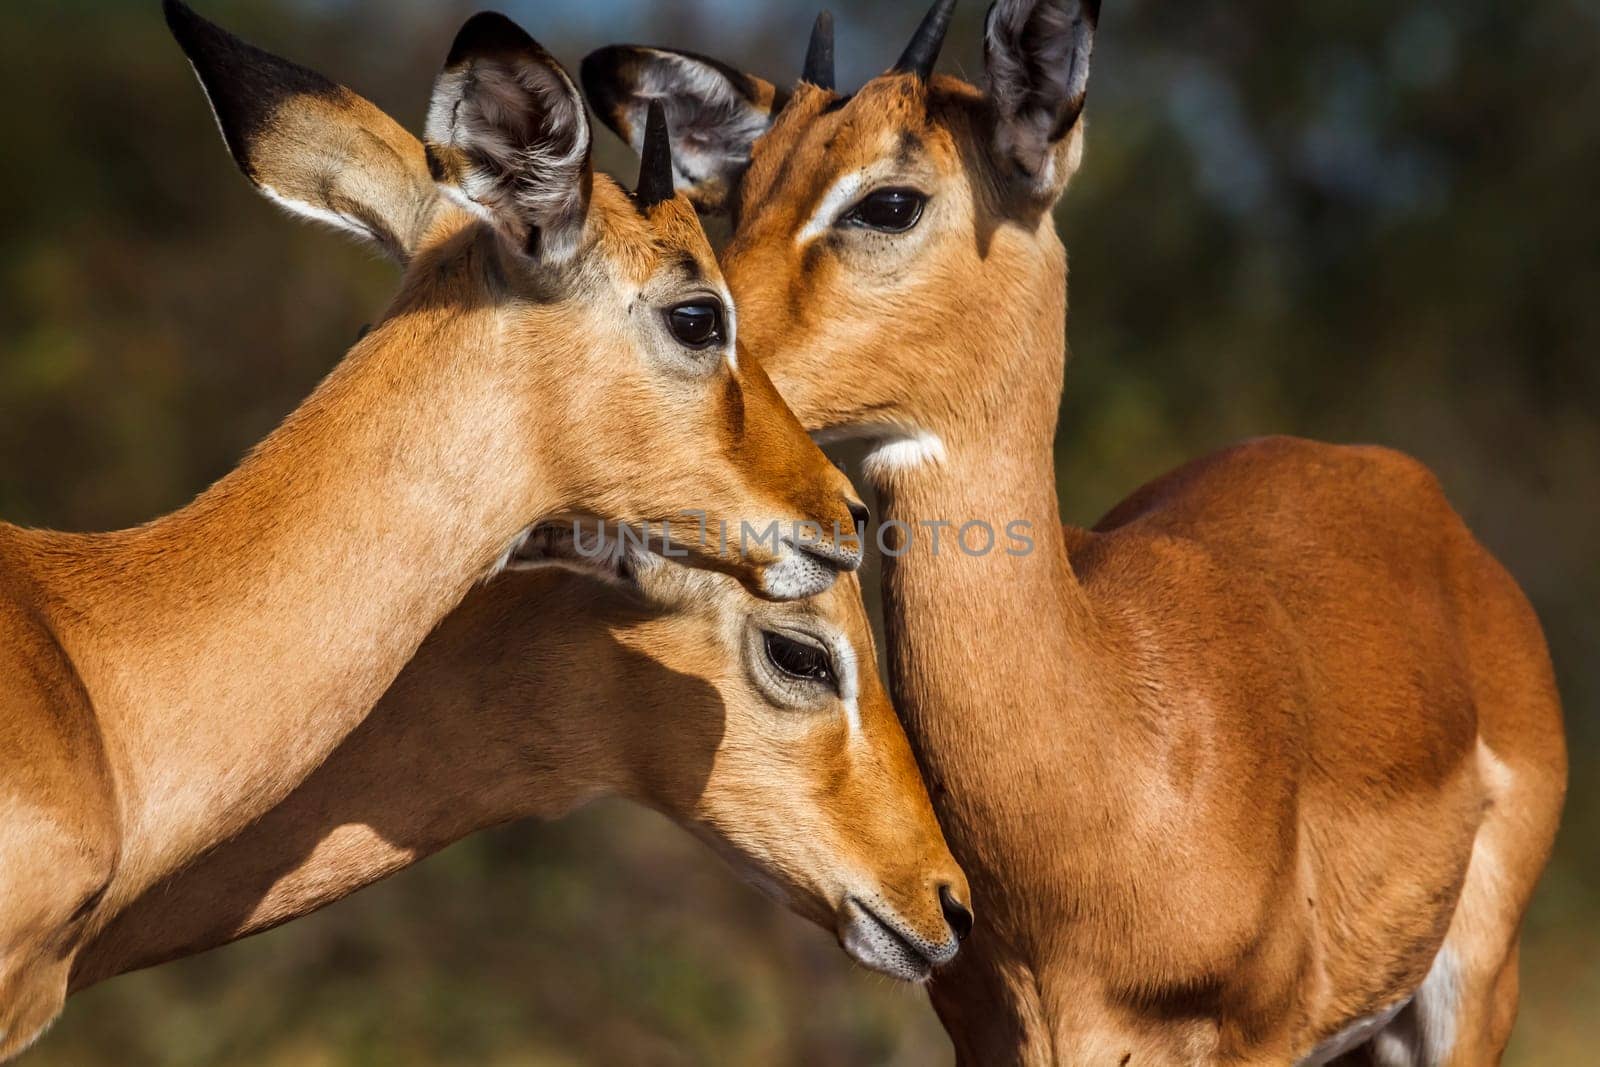 Three young Common Impala portrait bonding in Kruger National park, South Africa ; Specie Aepyceros melampus family of Bovidae